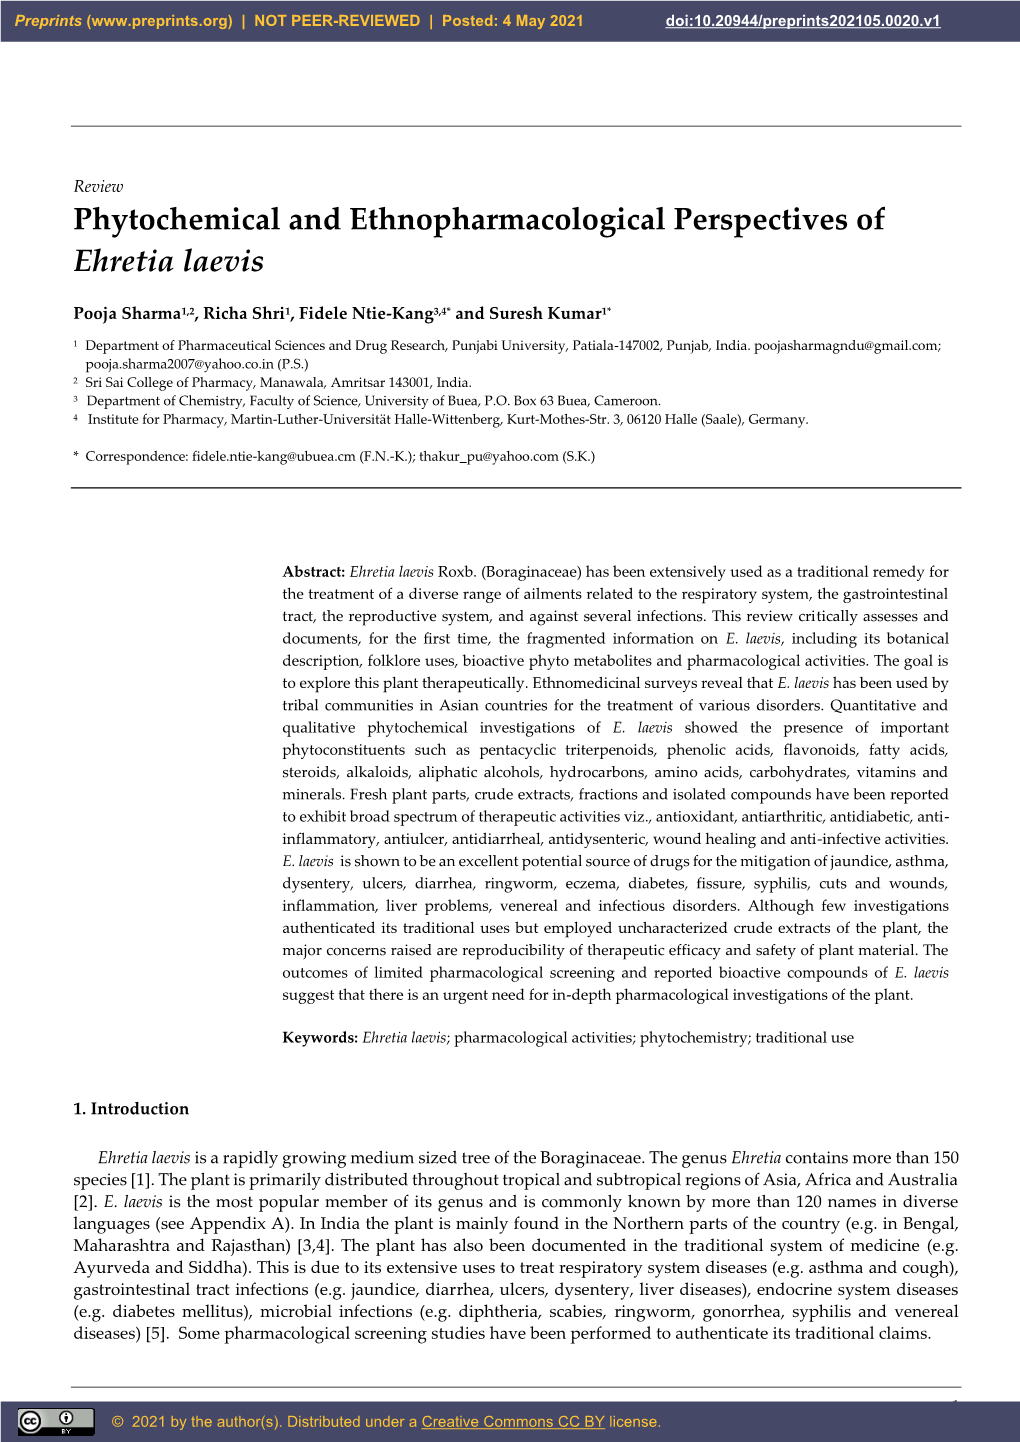 Phytochemical and Ethnopharmacological Perspectives of Ehretia Laevis